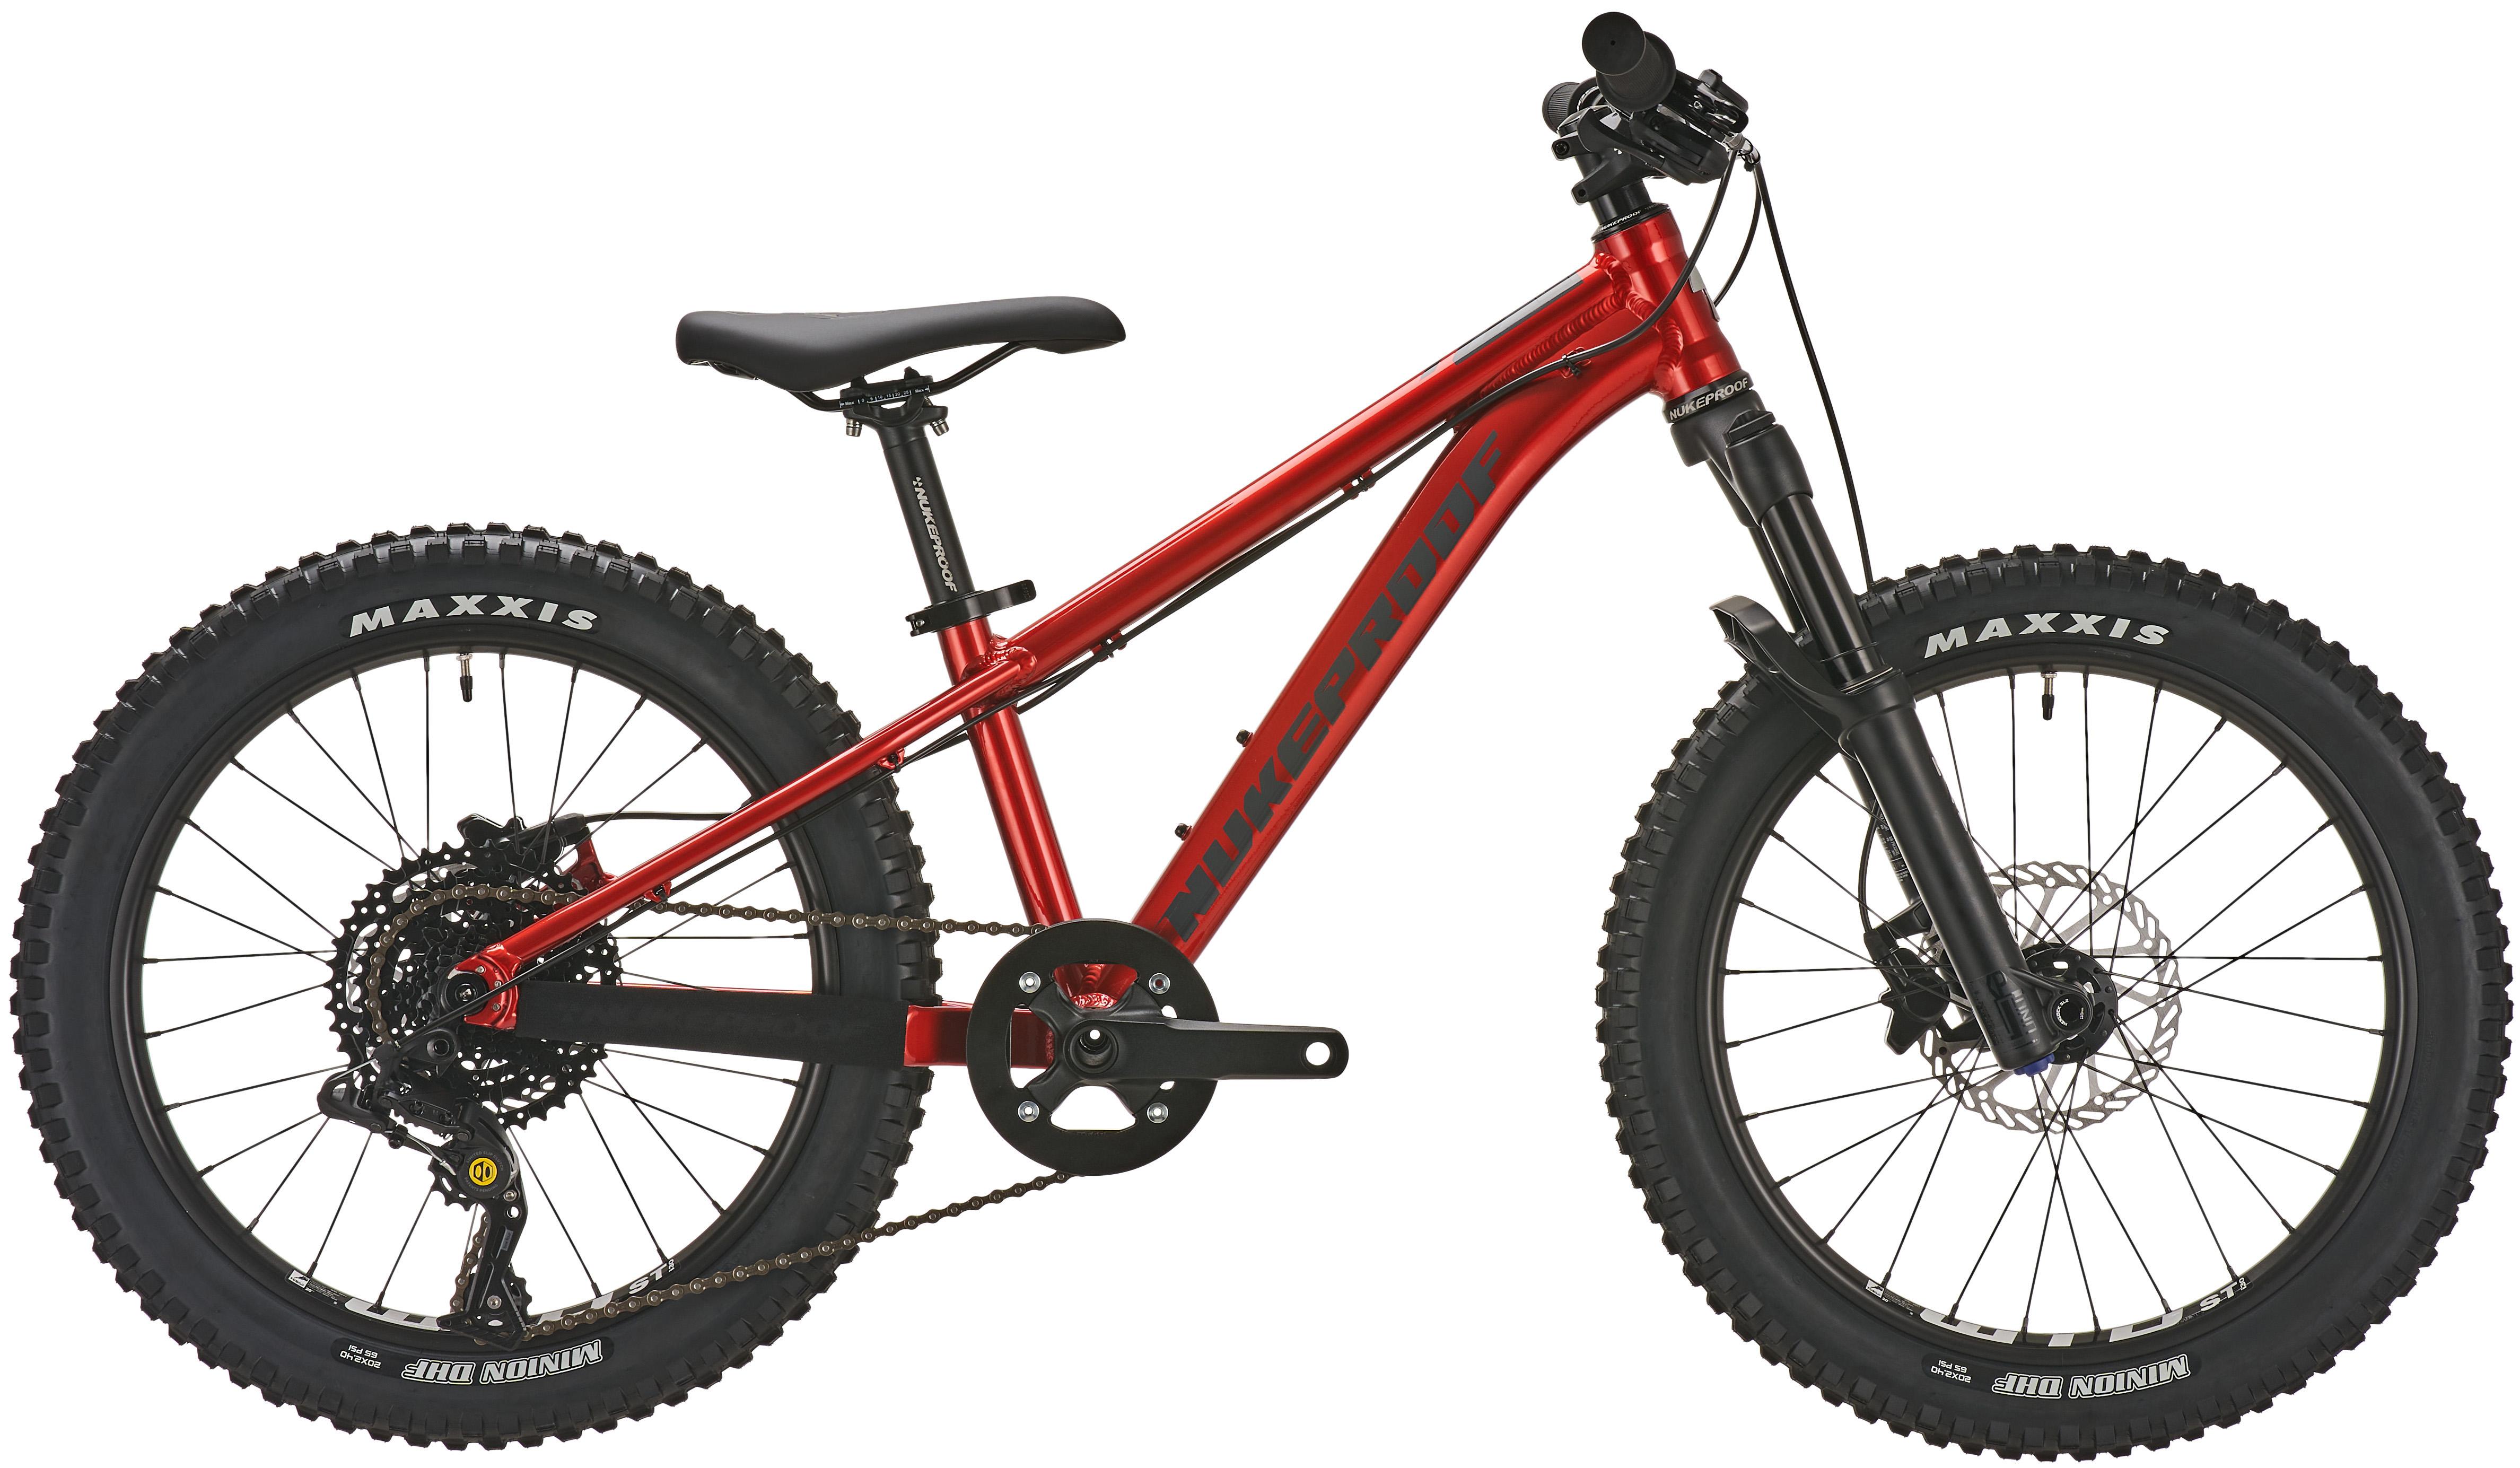 Nukeproof Cub-scout 20 Race Youth Mountain Bike - Racing Red